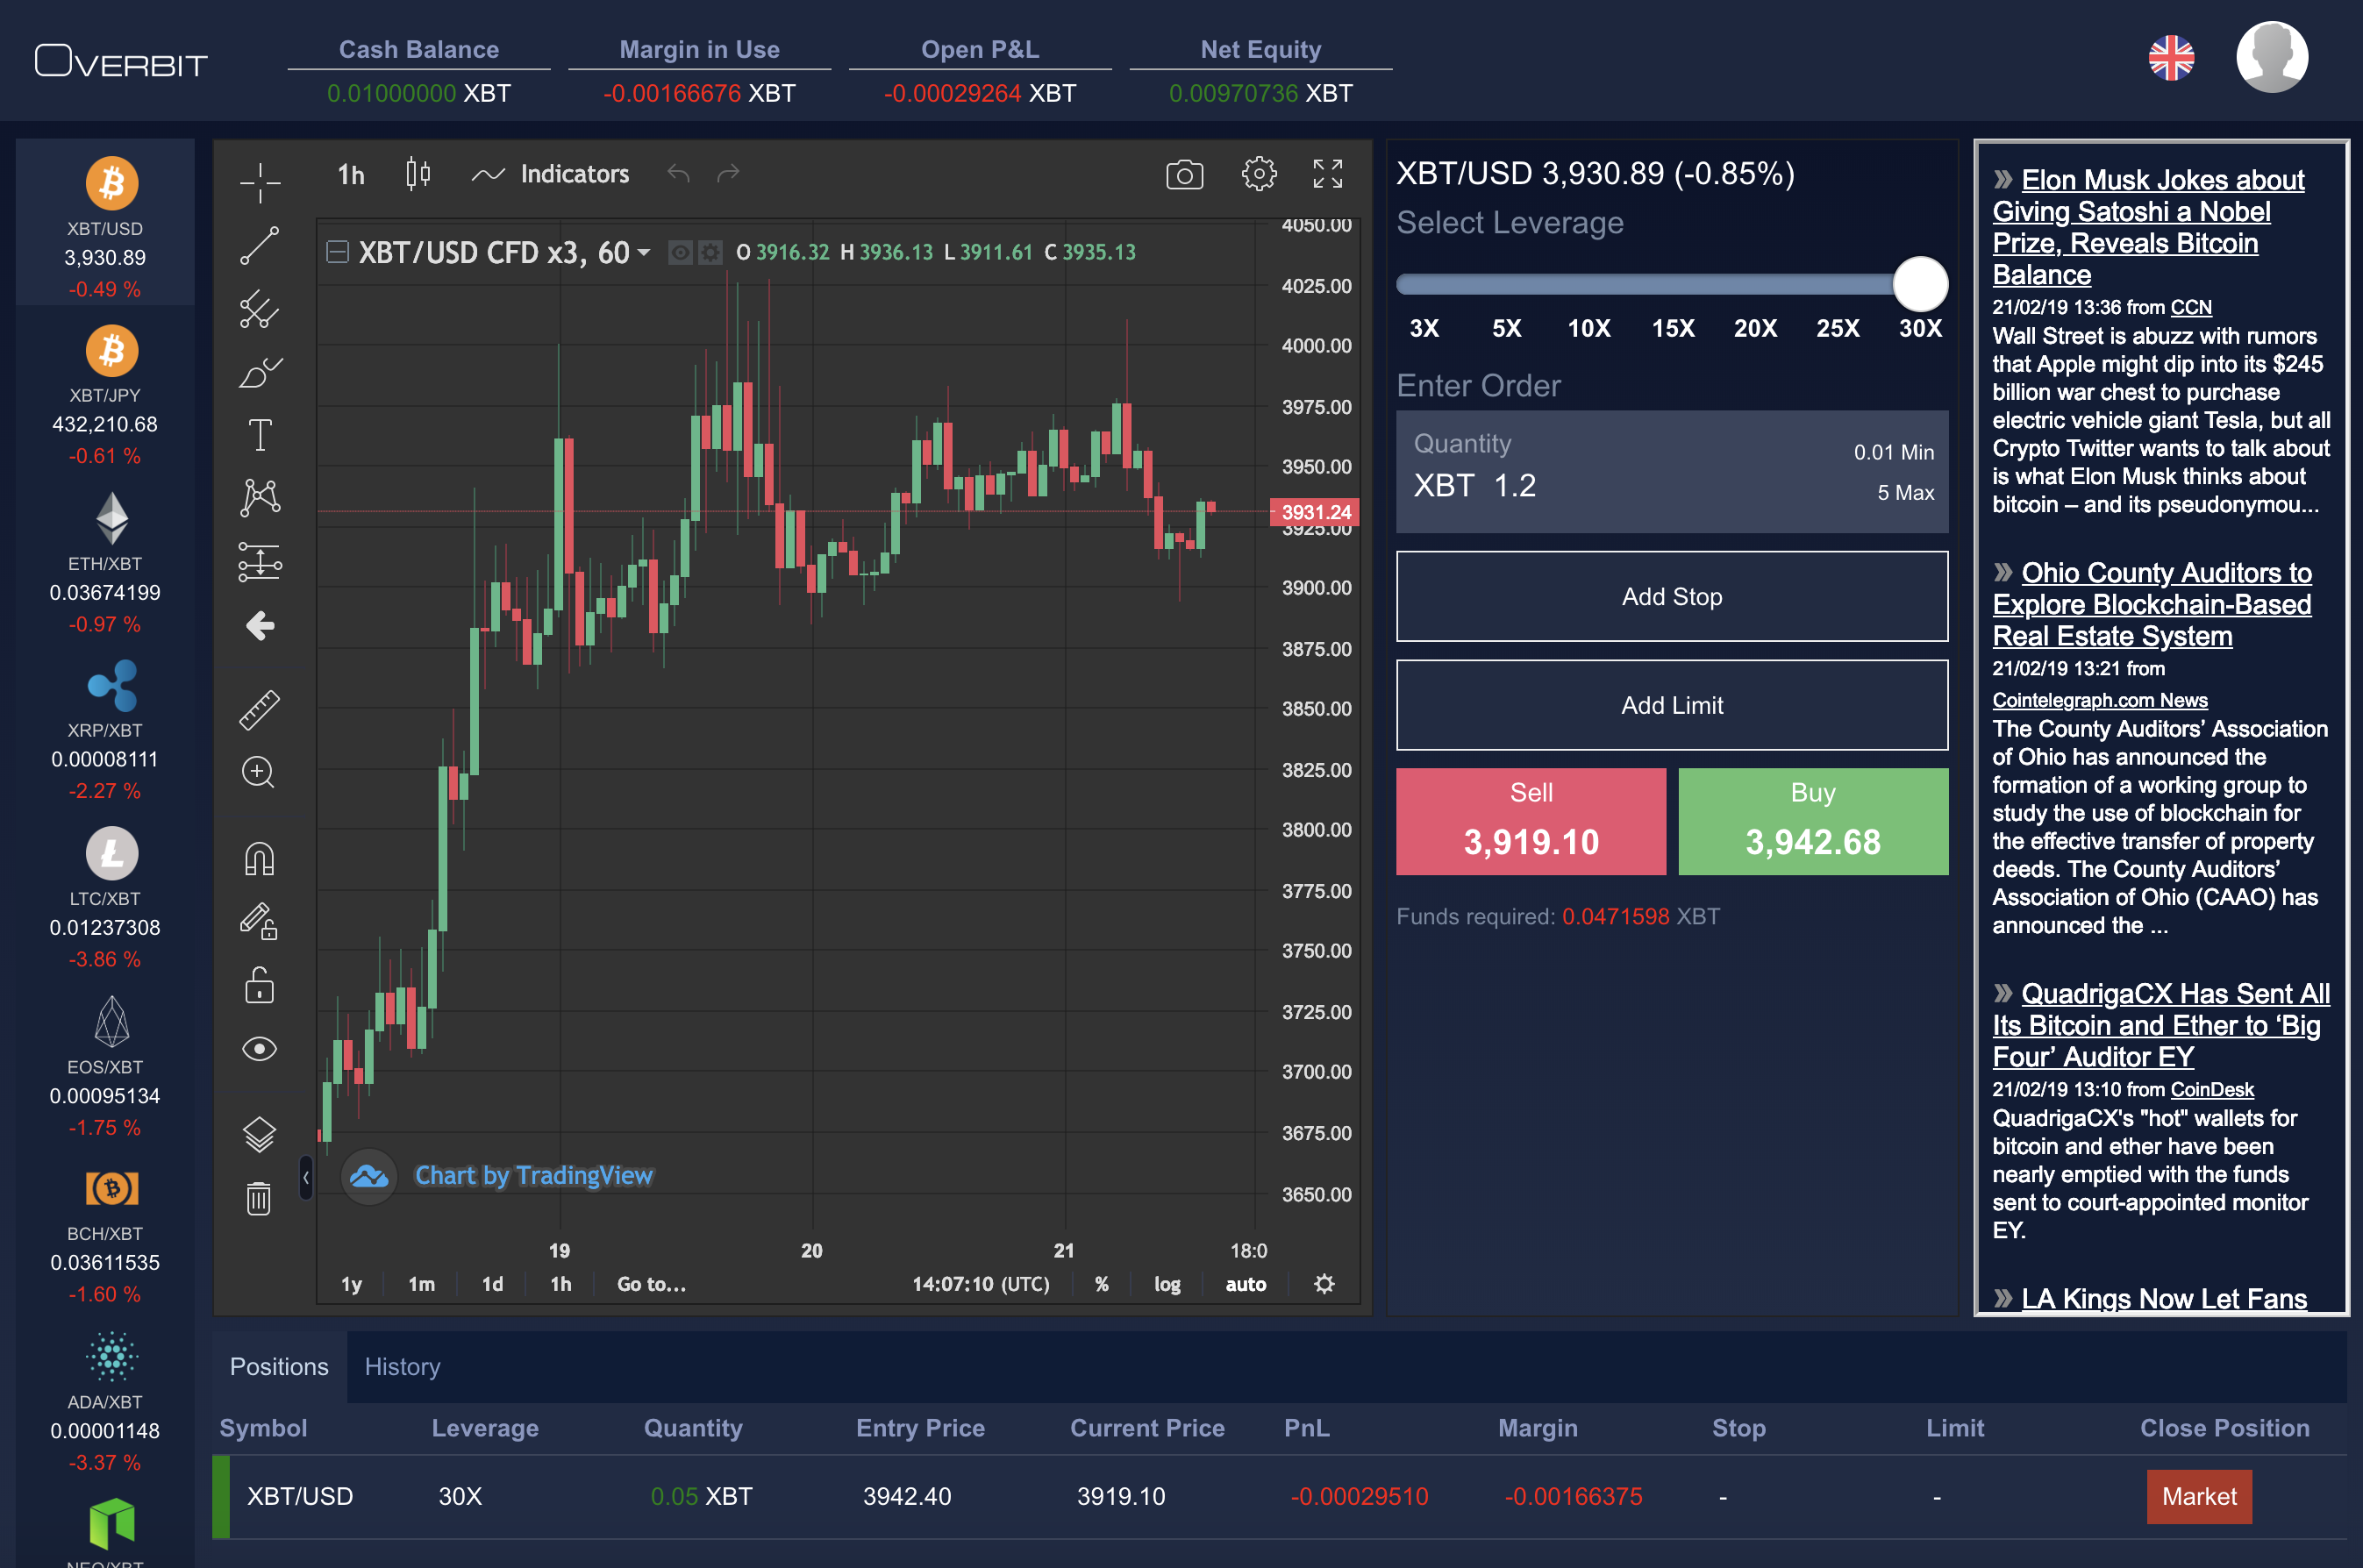 World's First Cryptocurrency Forex Trading Platform Goes Live